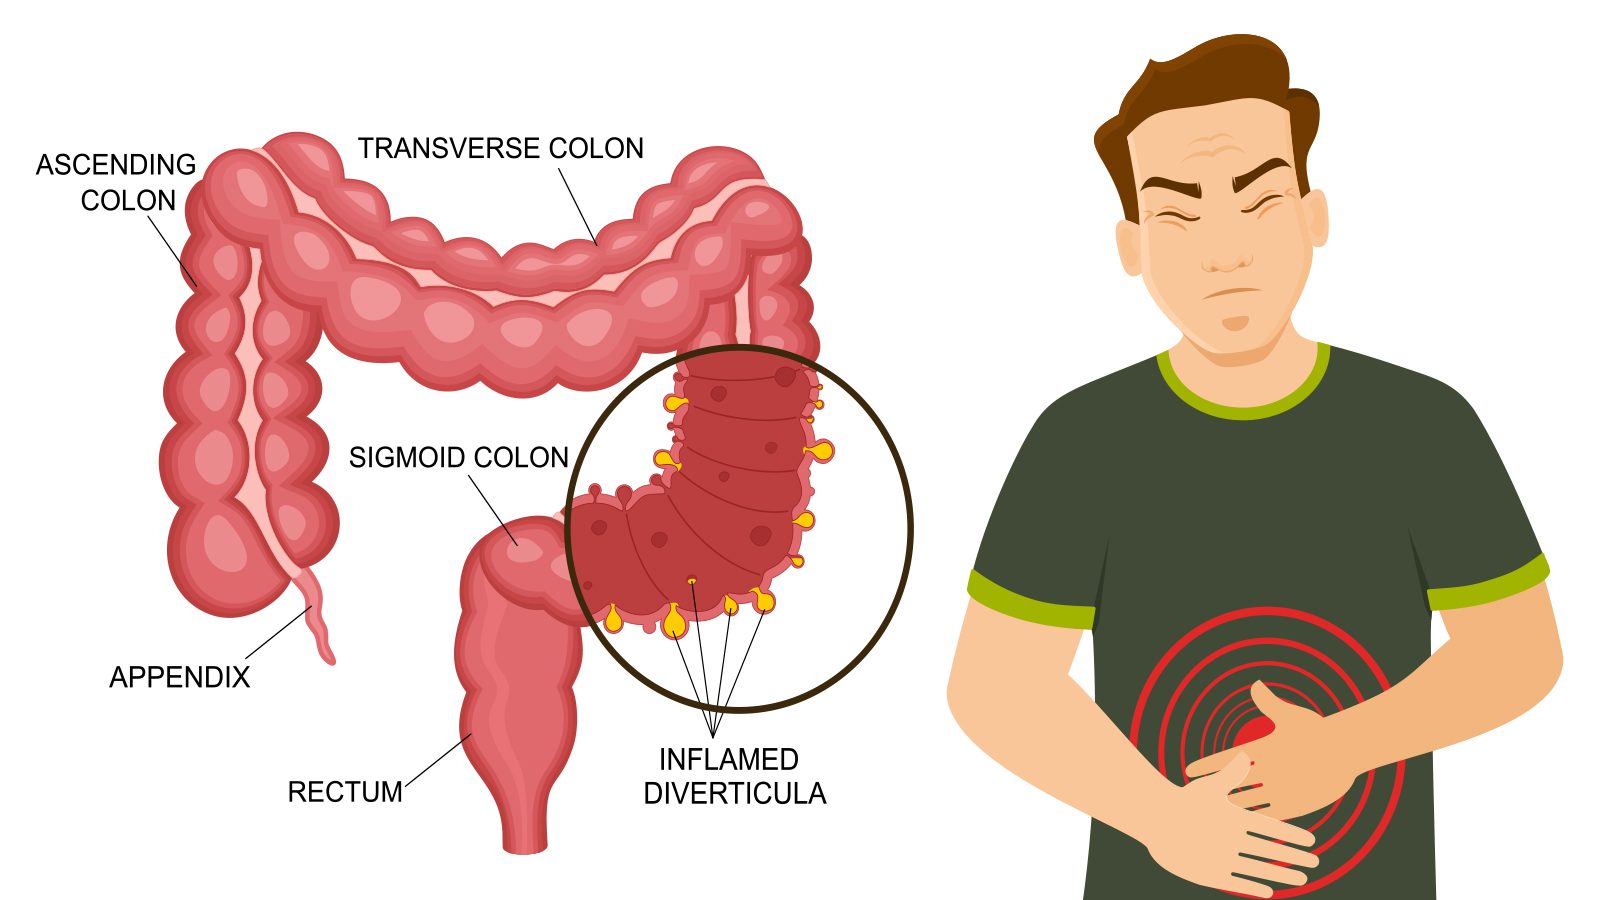 10 Signs of Diverticulitis (and What To Do) [Video]